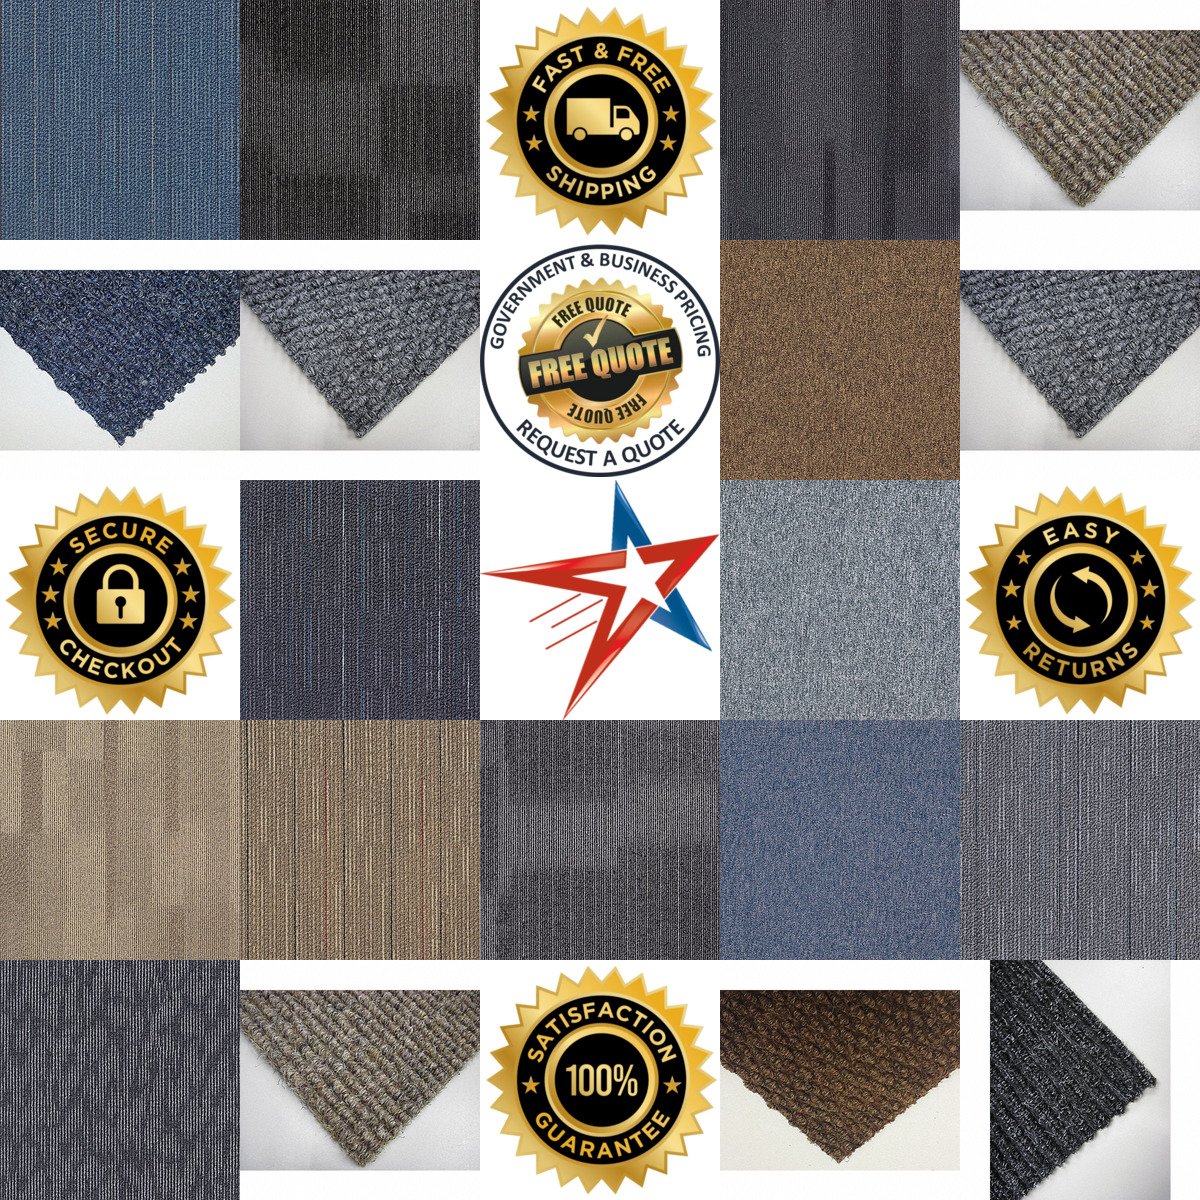 A selection of Carpet Tile products on GoVets